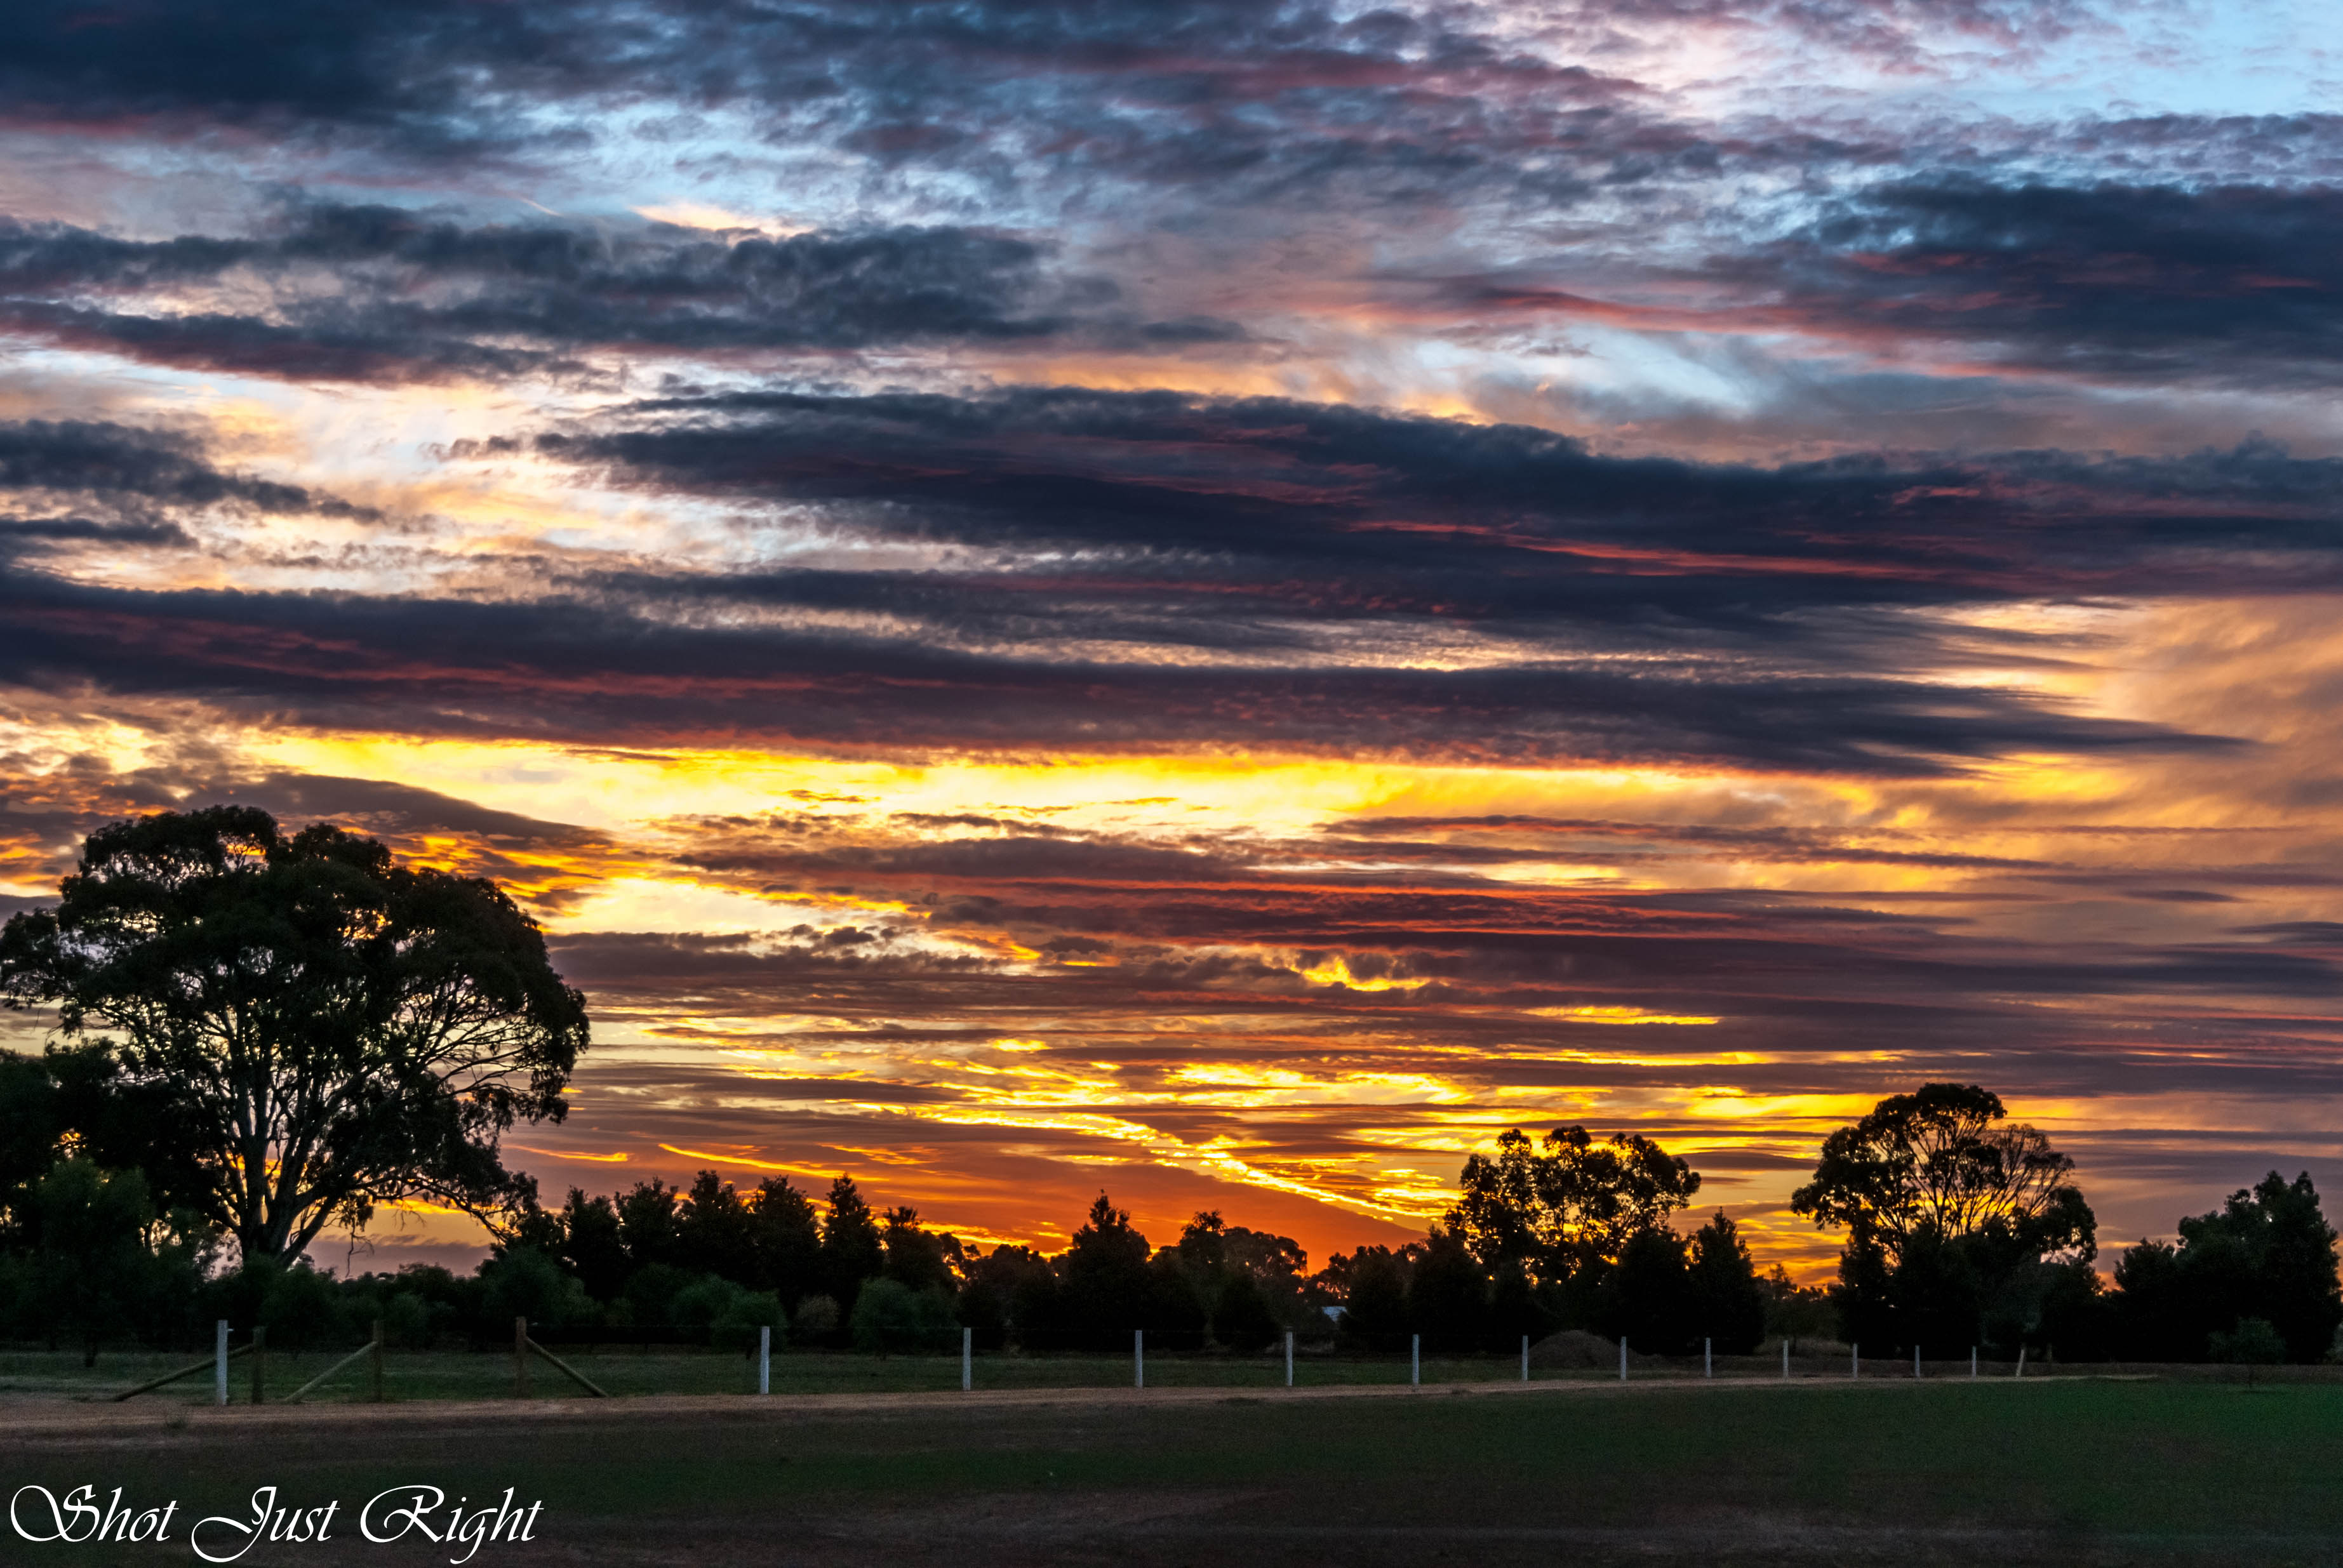 Another unique sunset from Echuca | Shot Just Right Photography